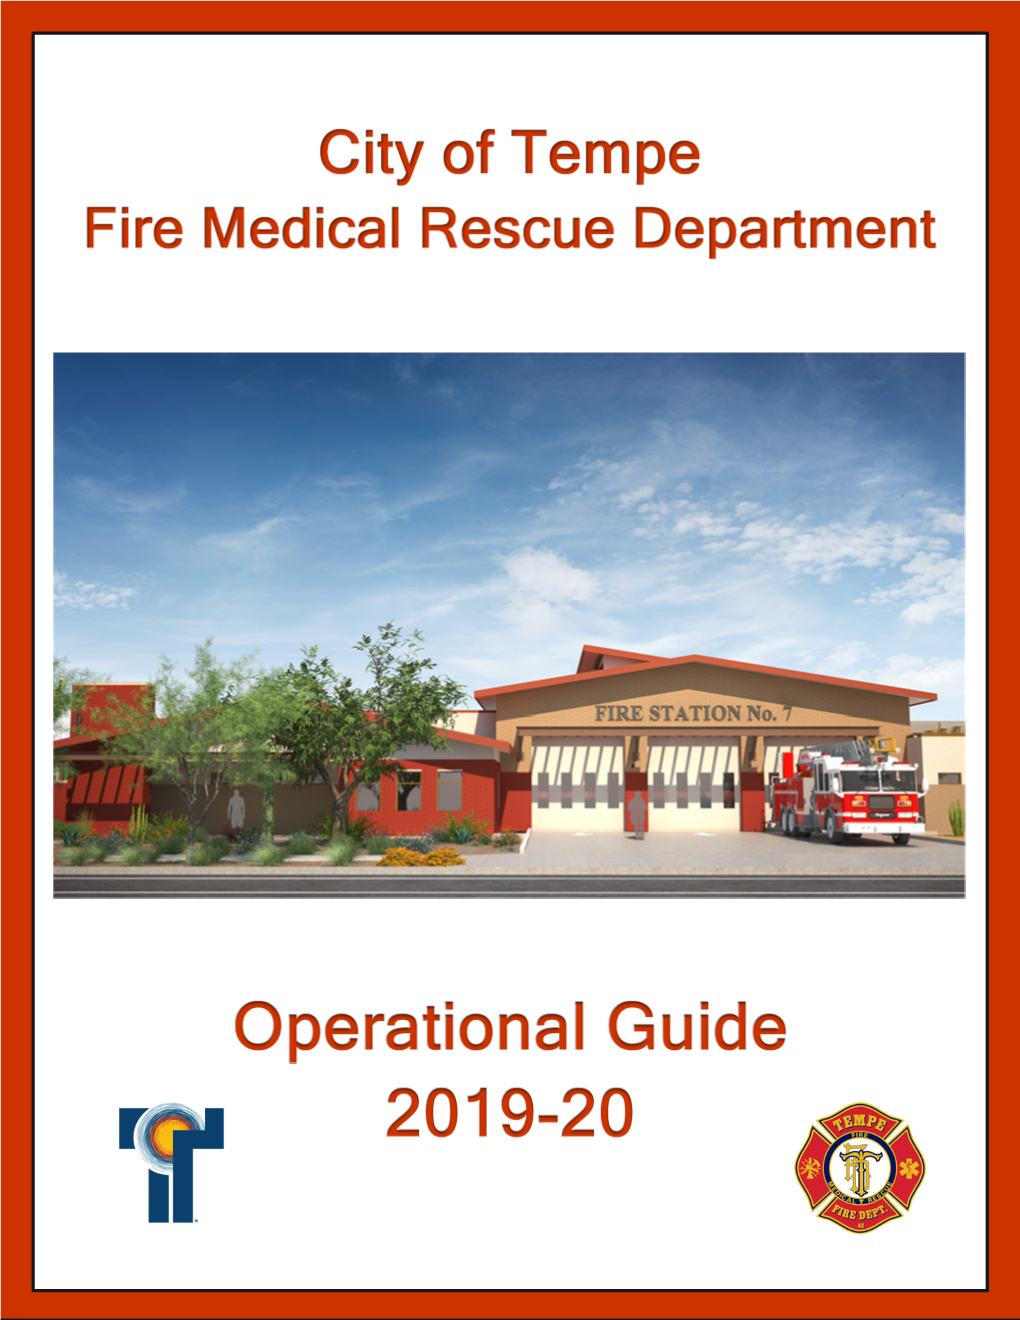 Fire Medical Rescue Department